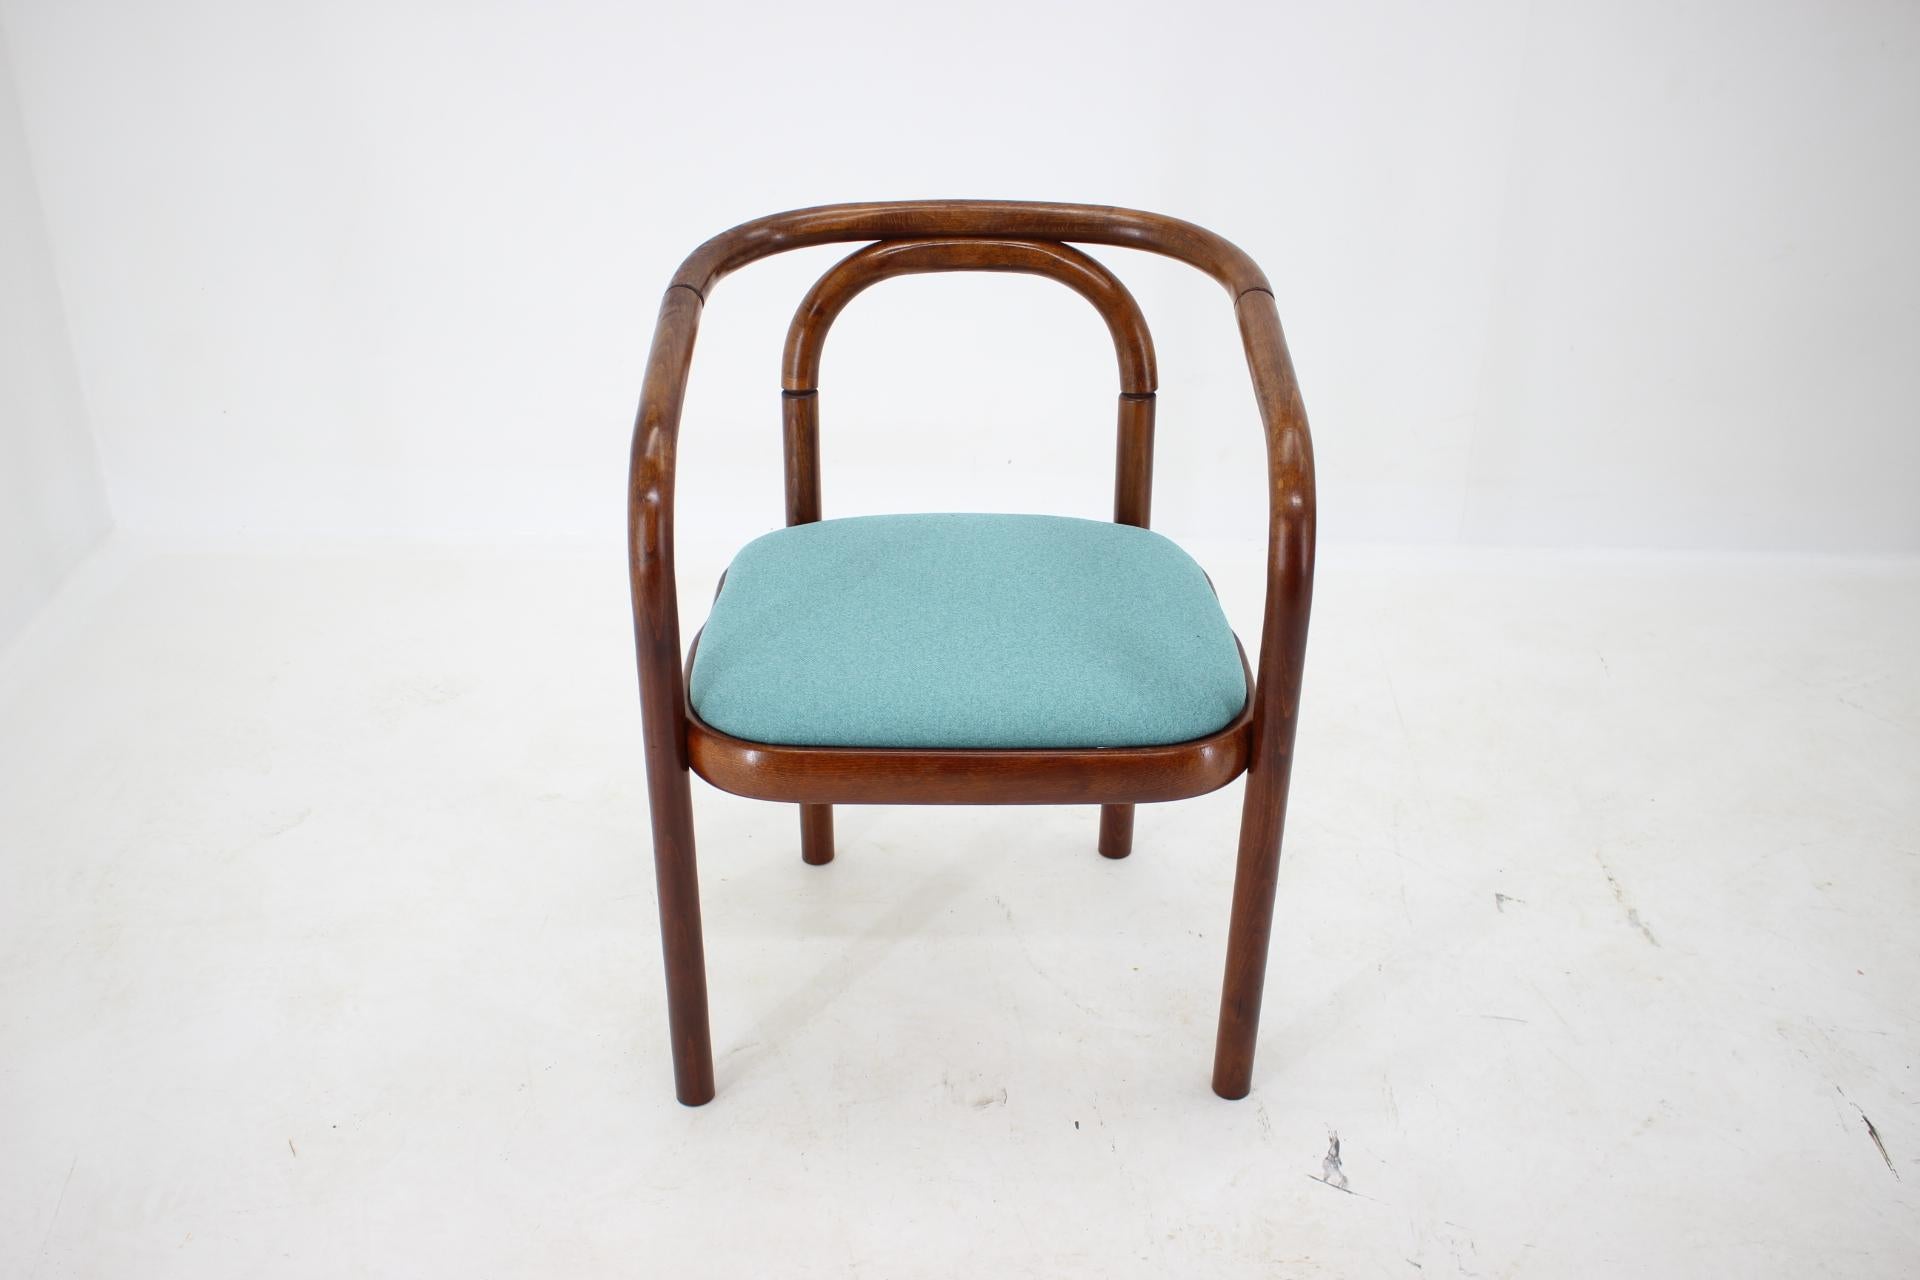 - 1992
- maker: TON Bystrice pod Hostýnem
- made of bent beechwood, fabric
- refurbished
- reupholstered
- very good condition.